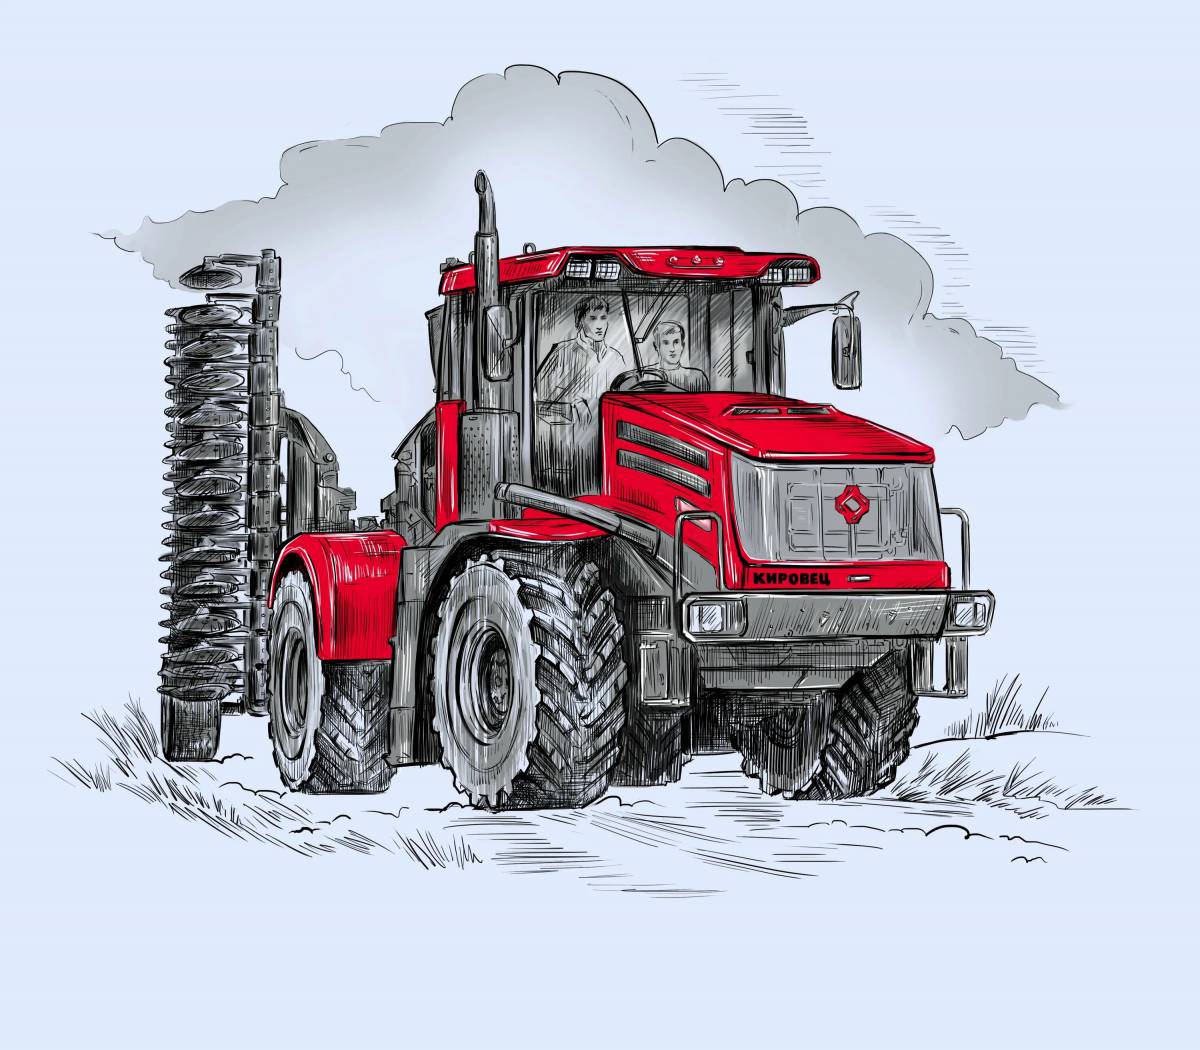 Great tractor k 700 coloring book